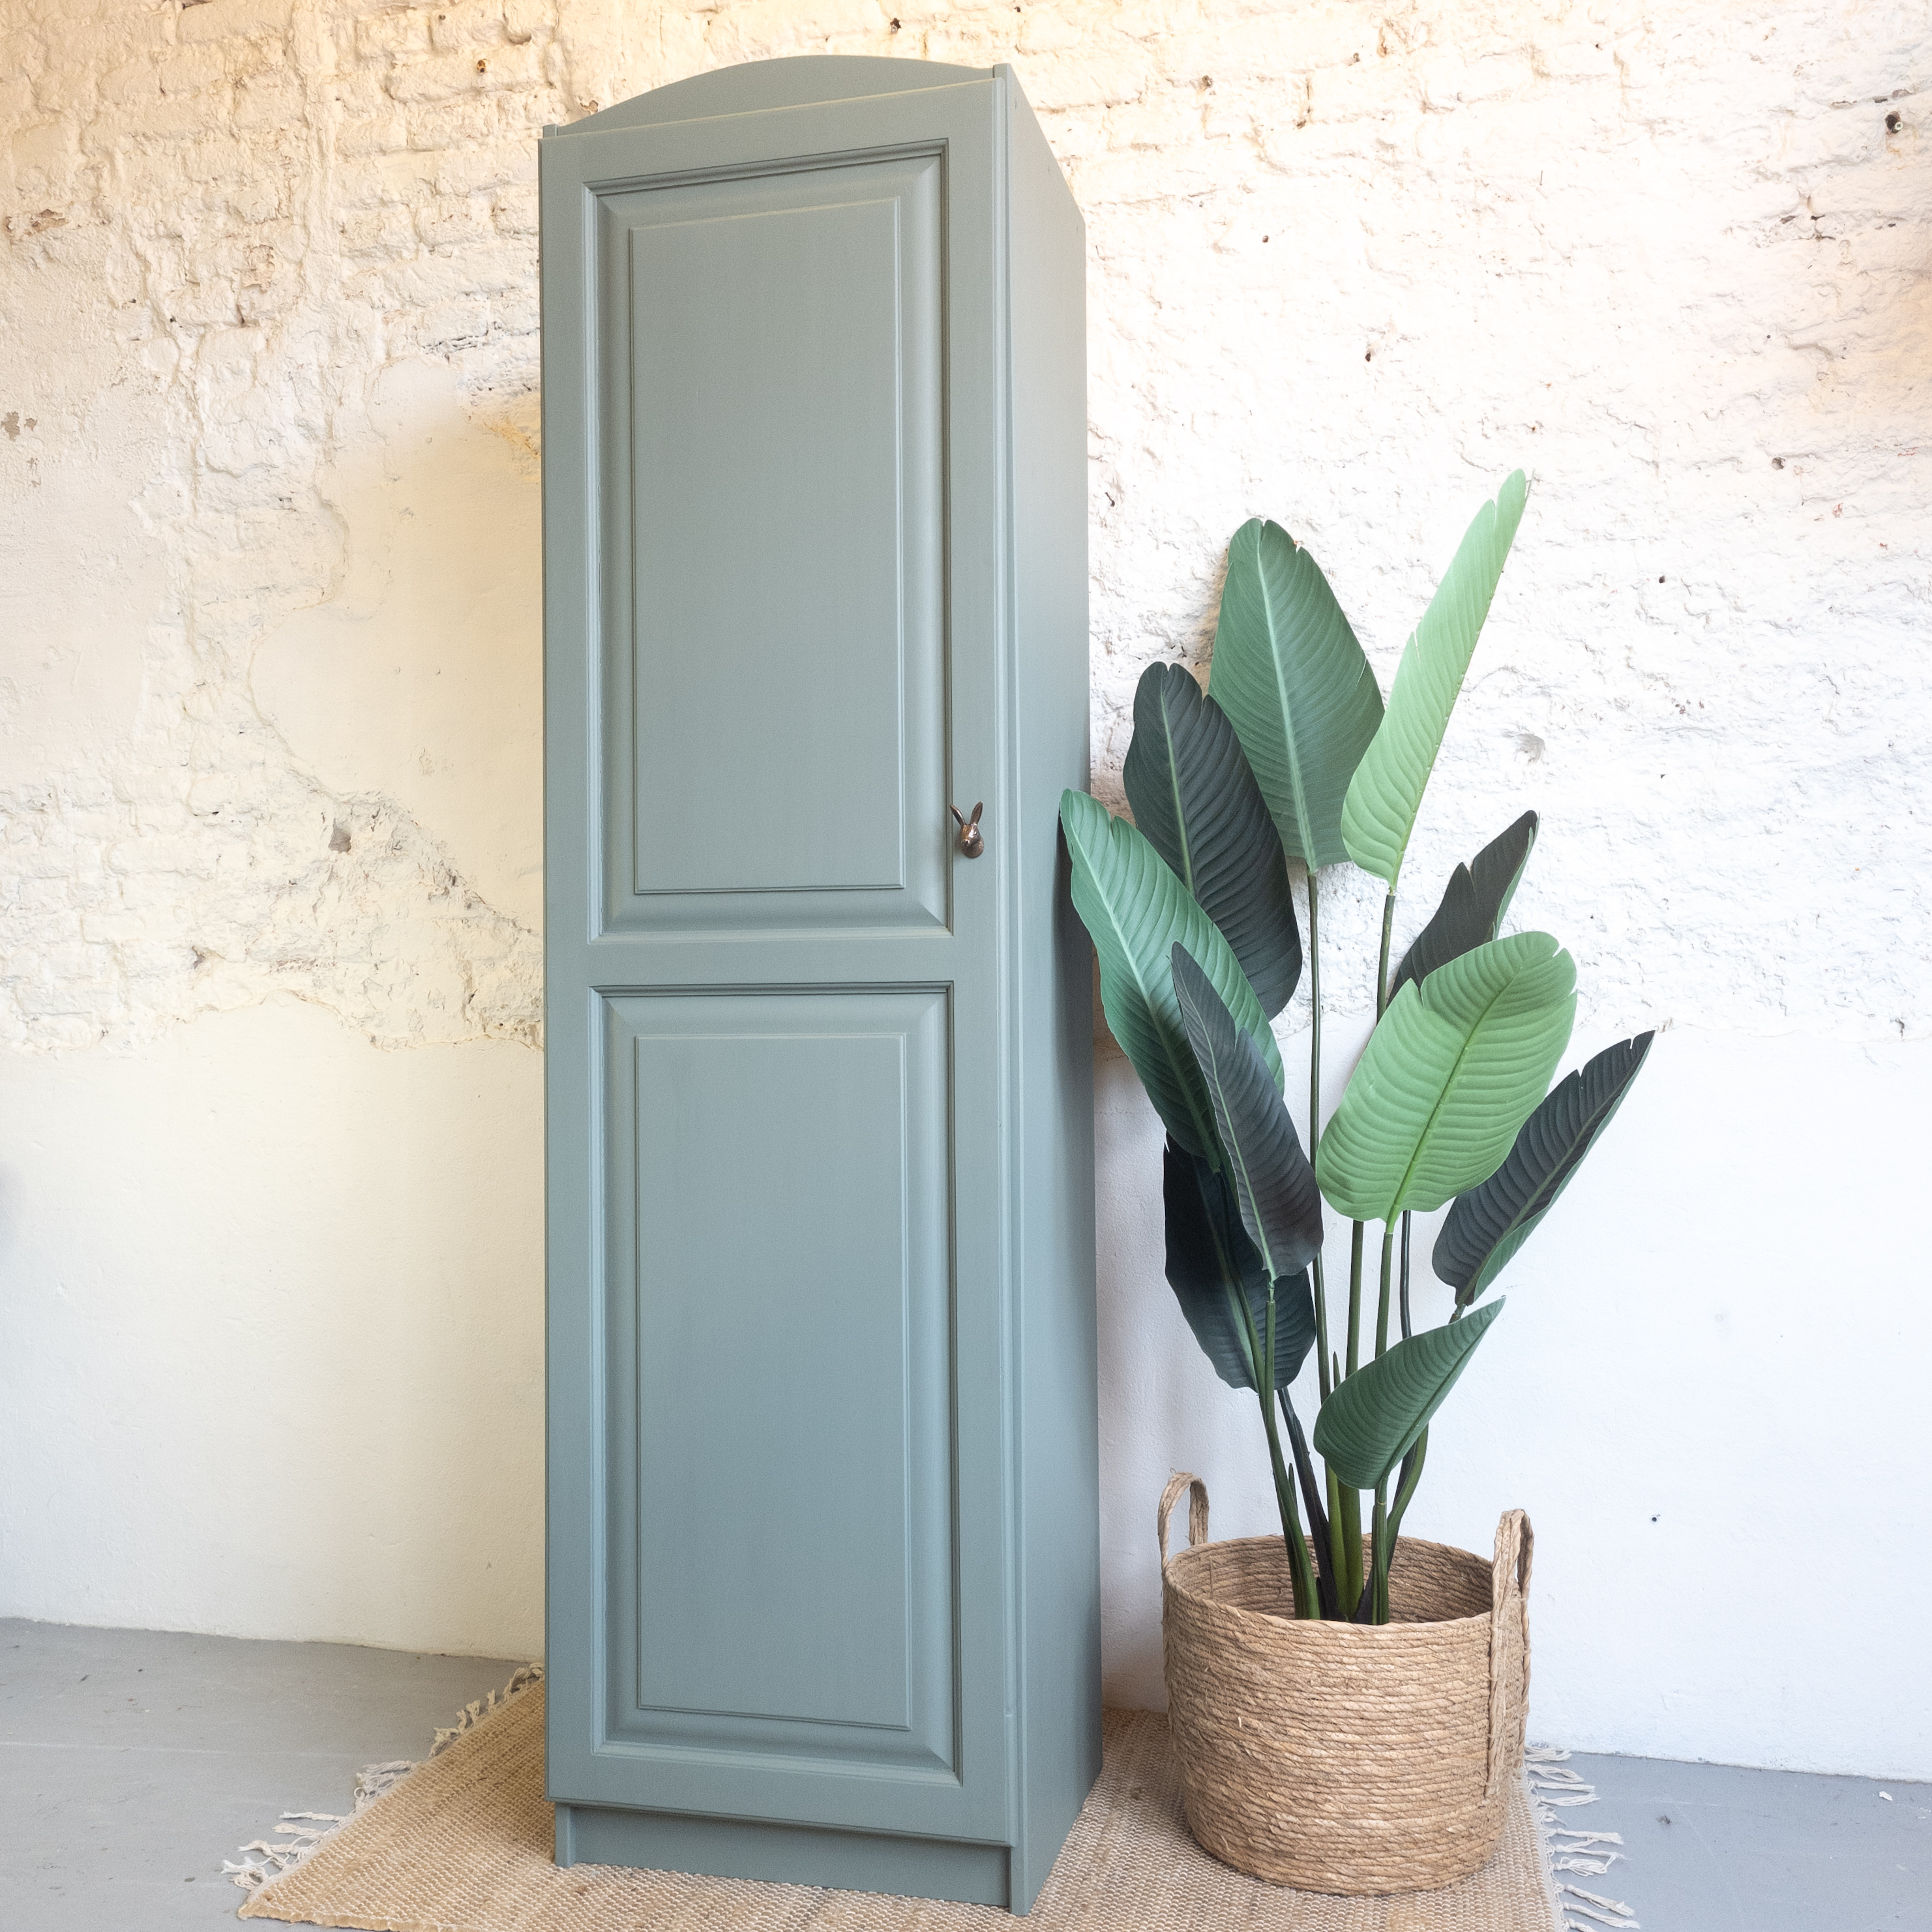 Linnenkast Carriage House Fusion Mineral paint. opgeknapt door goed gestyled Brielle